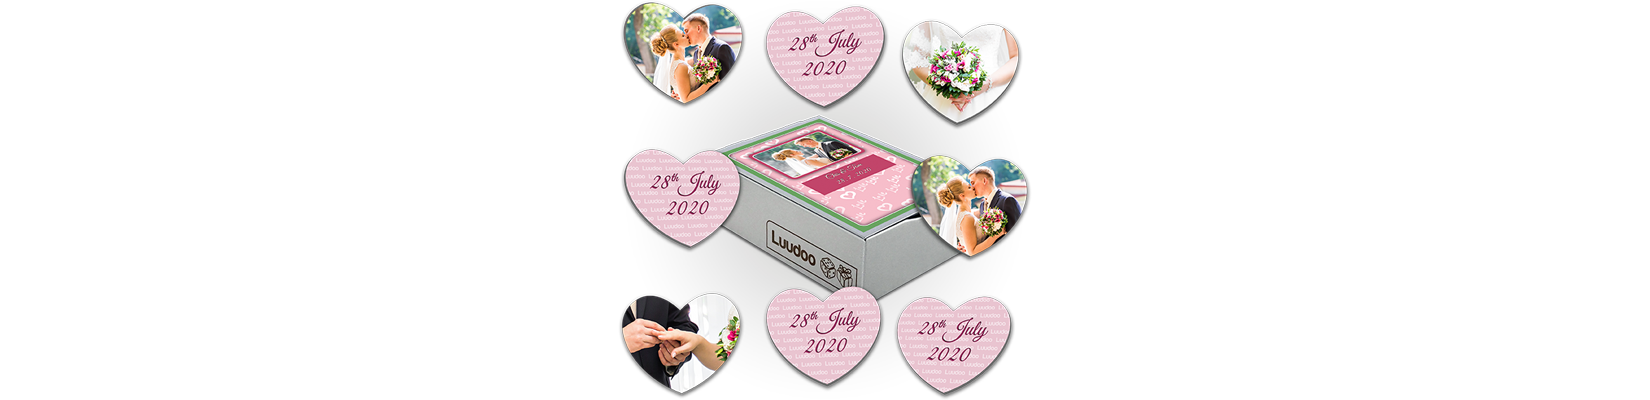 LUUDOO's heart-shaped, custom-printed match games make for great wedding gifts